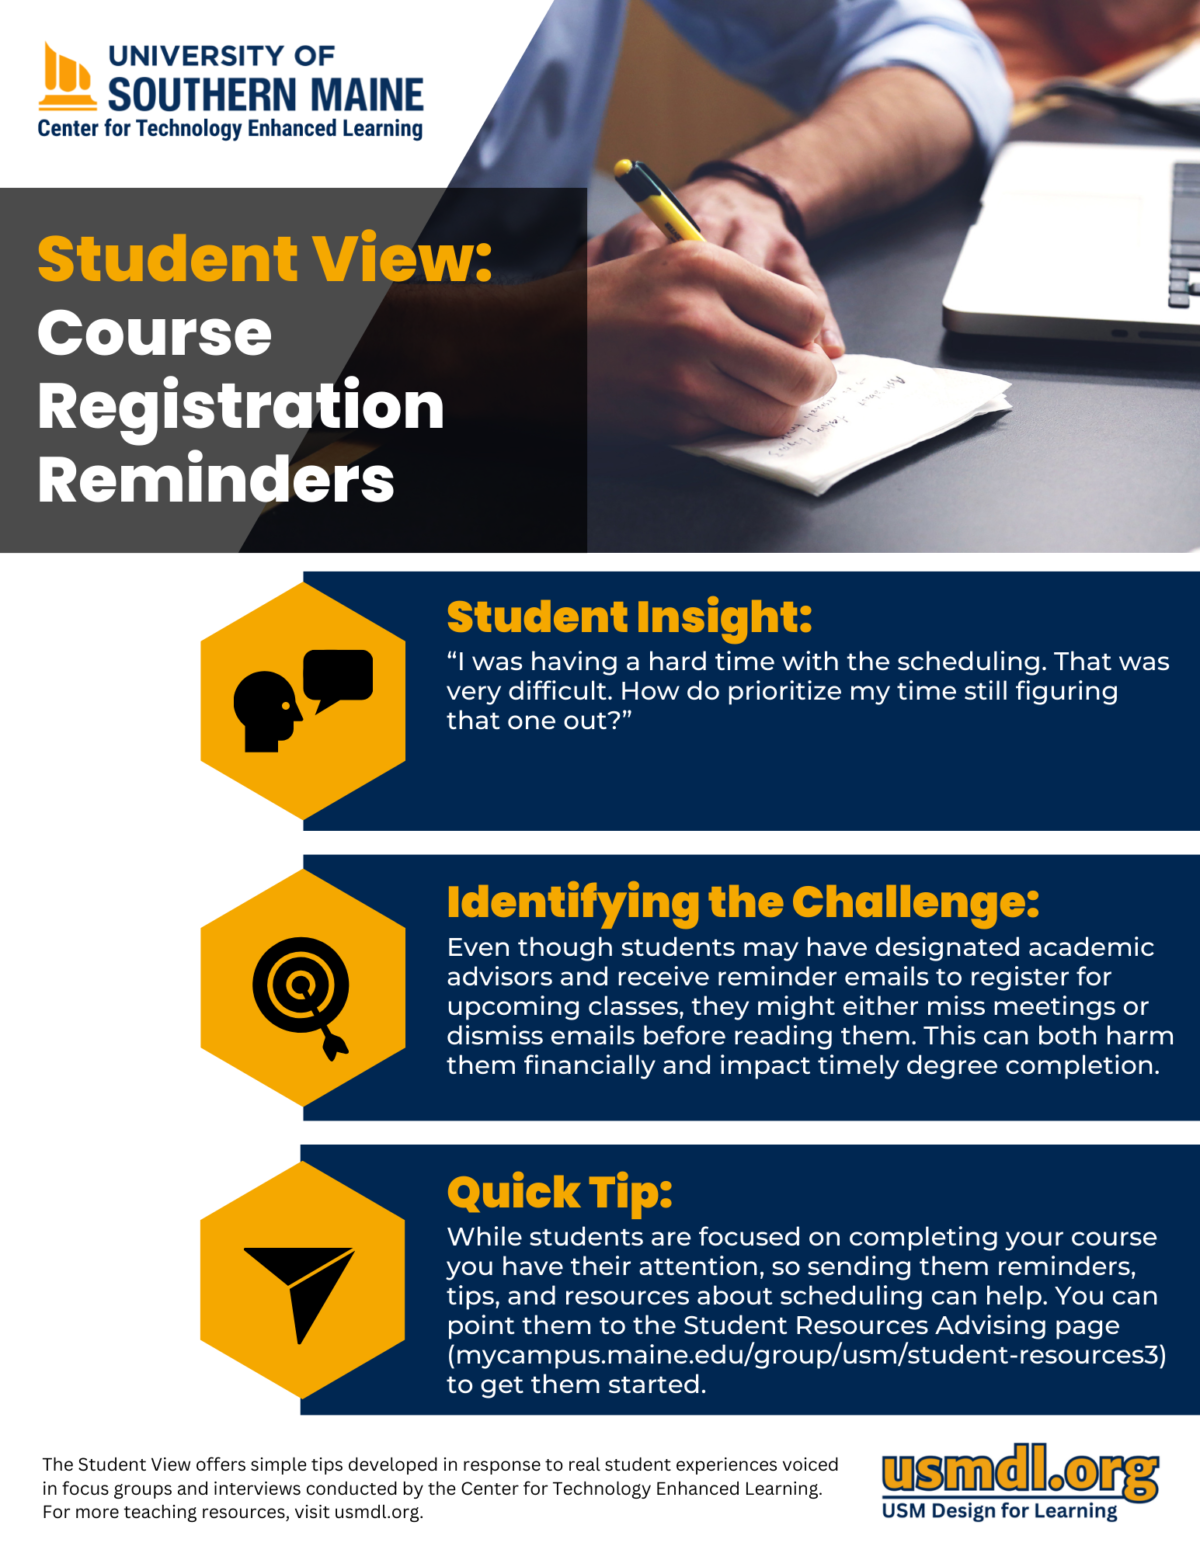 Student View Infographic. All information in text following.